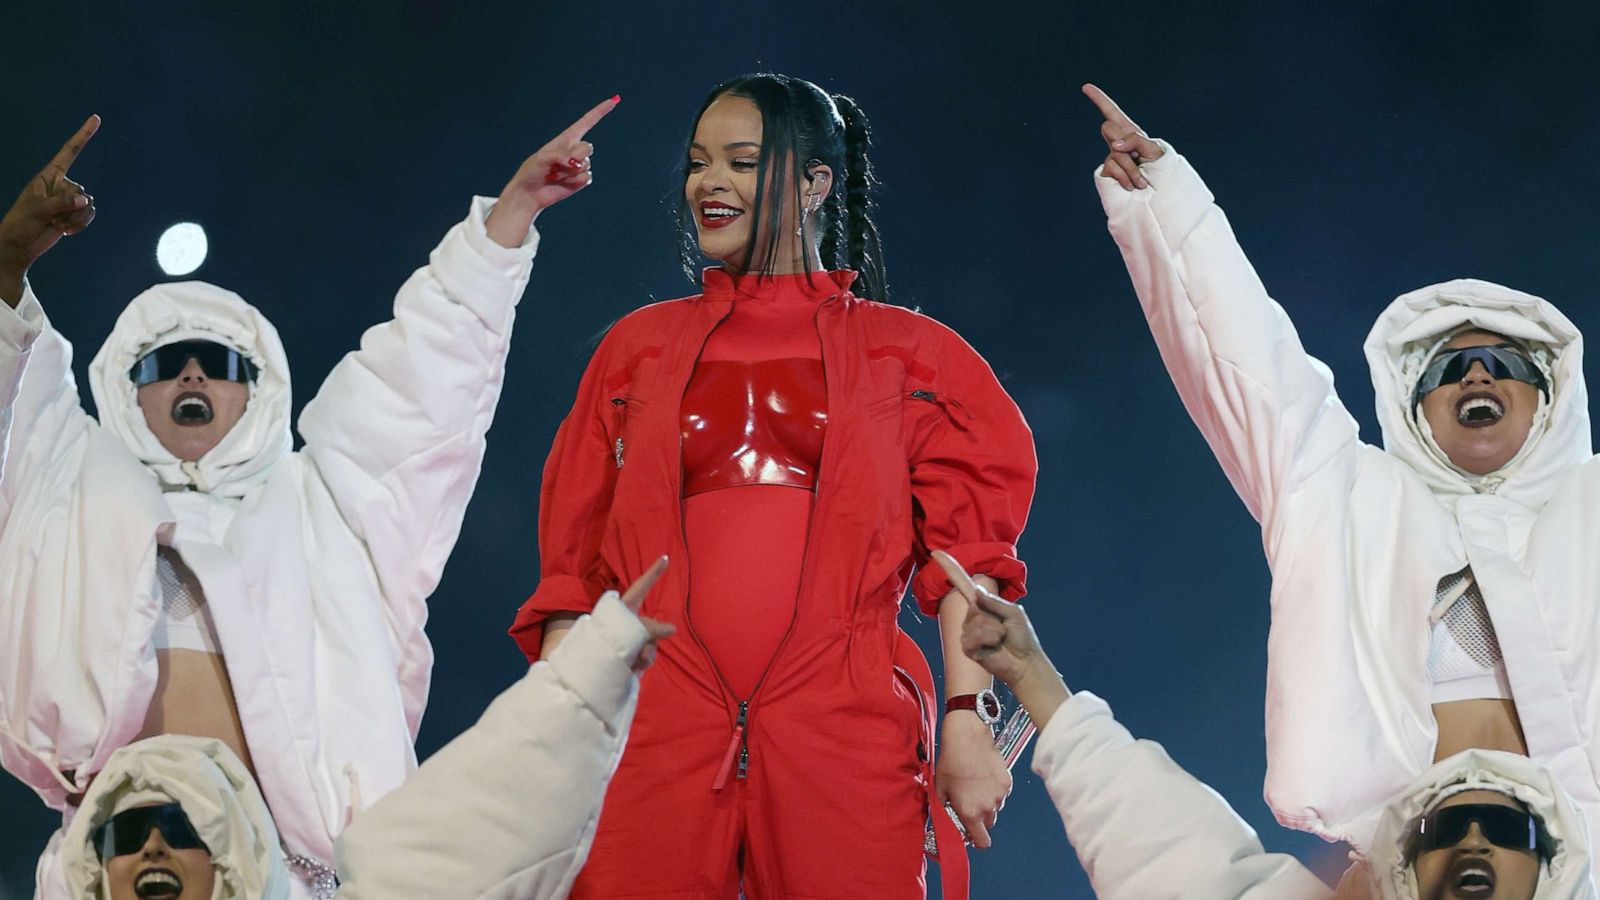 Inside Rihanna's red hot Super Bowl 2023 style: All the glam